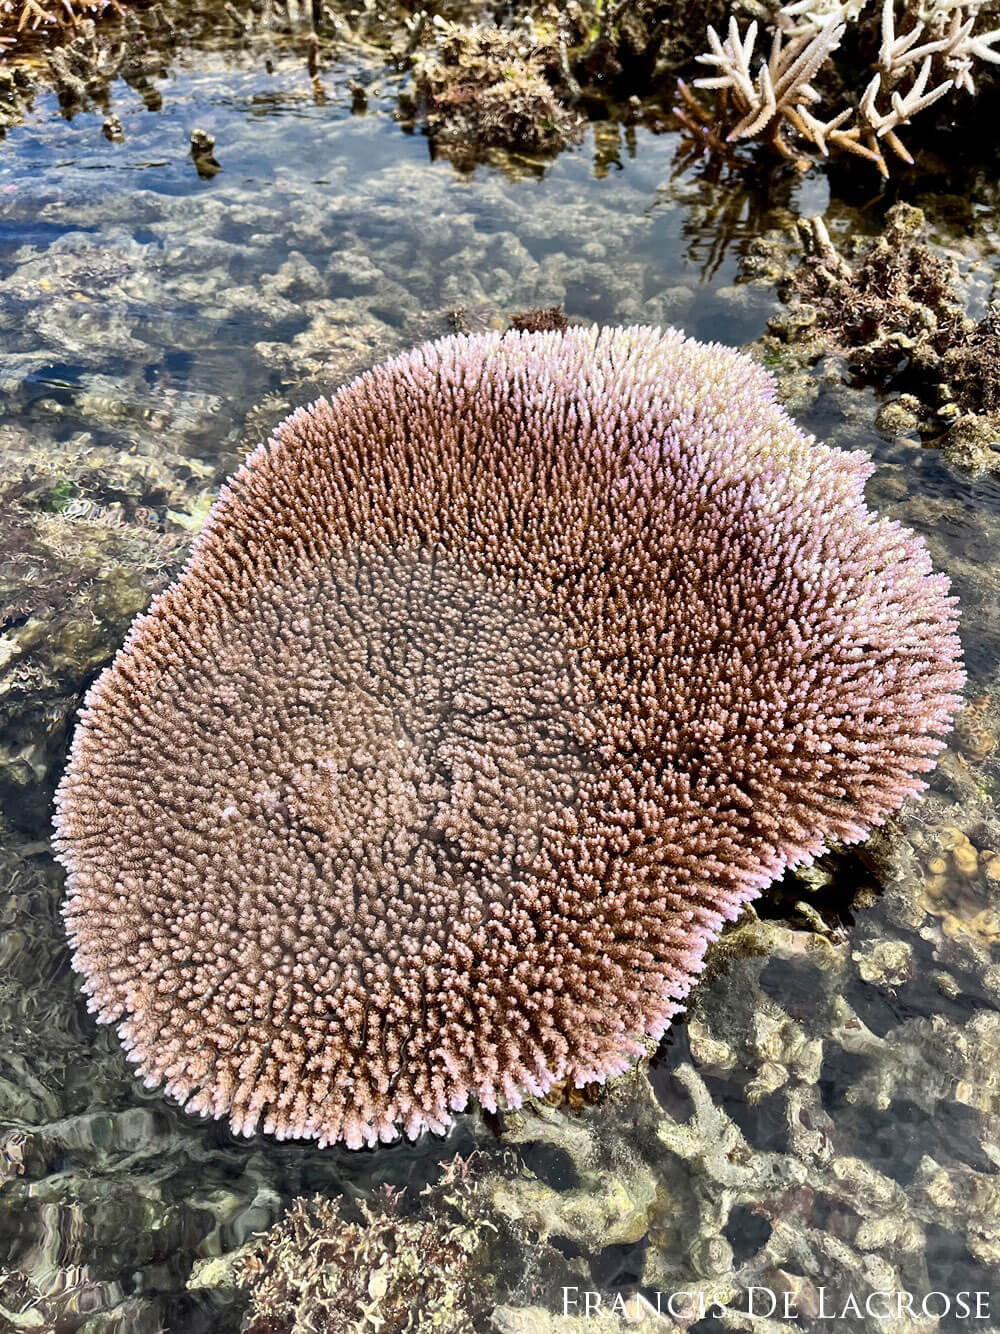 Coral just under sea level.